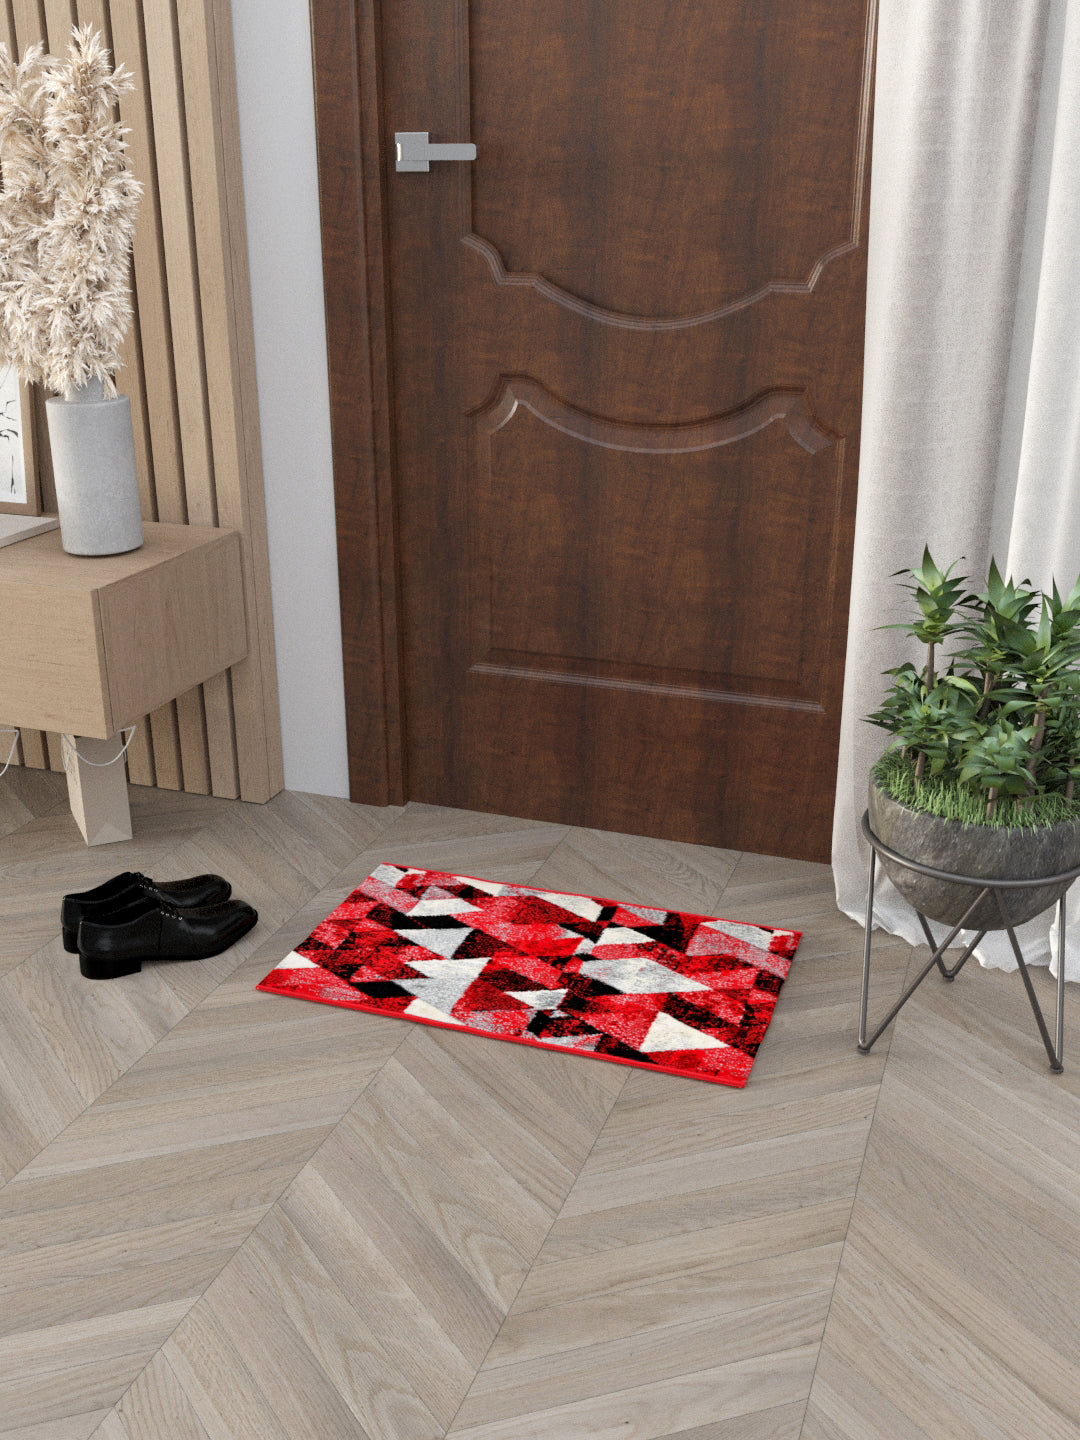 Doormat With Anti Skid Backing; 16x24 Inches; Red Black Triangles